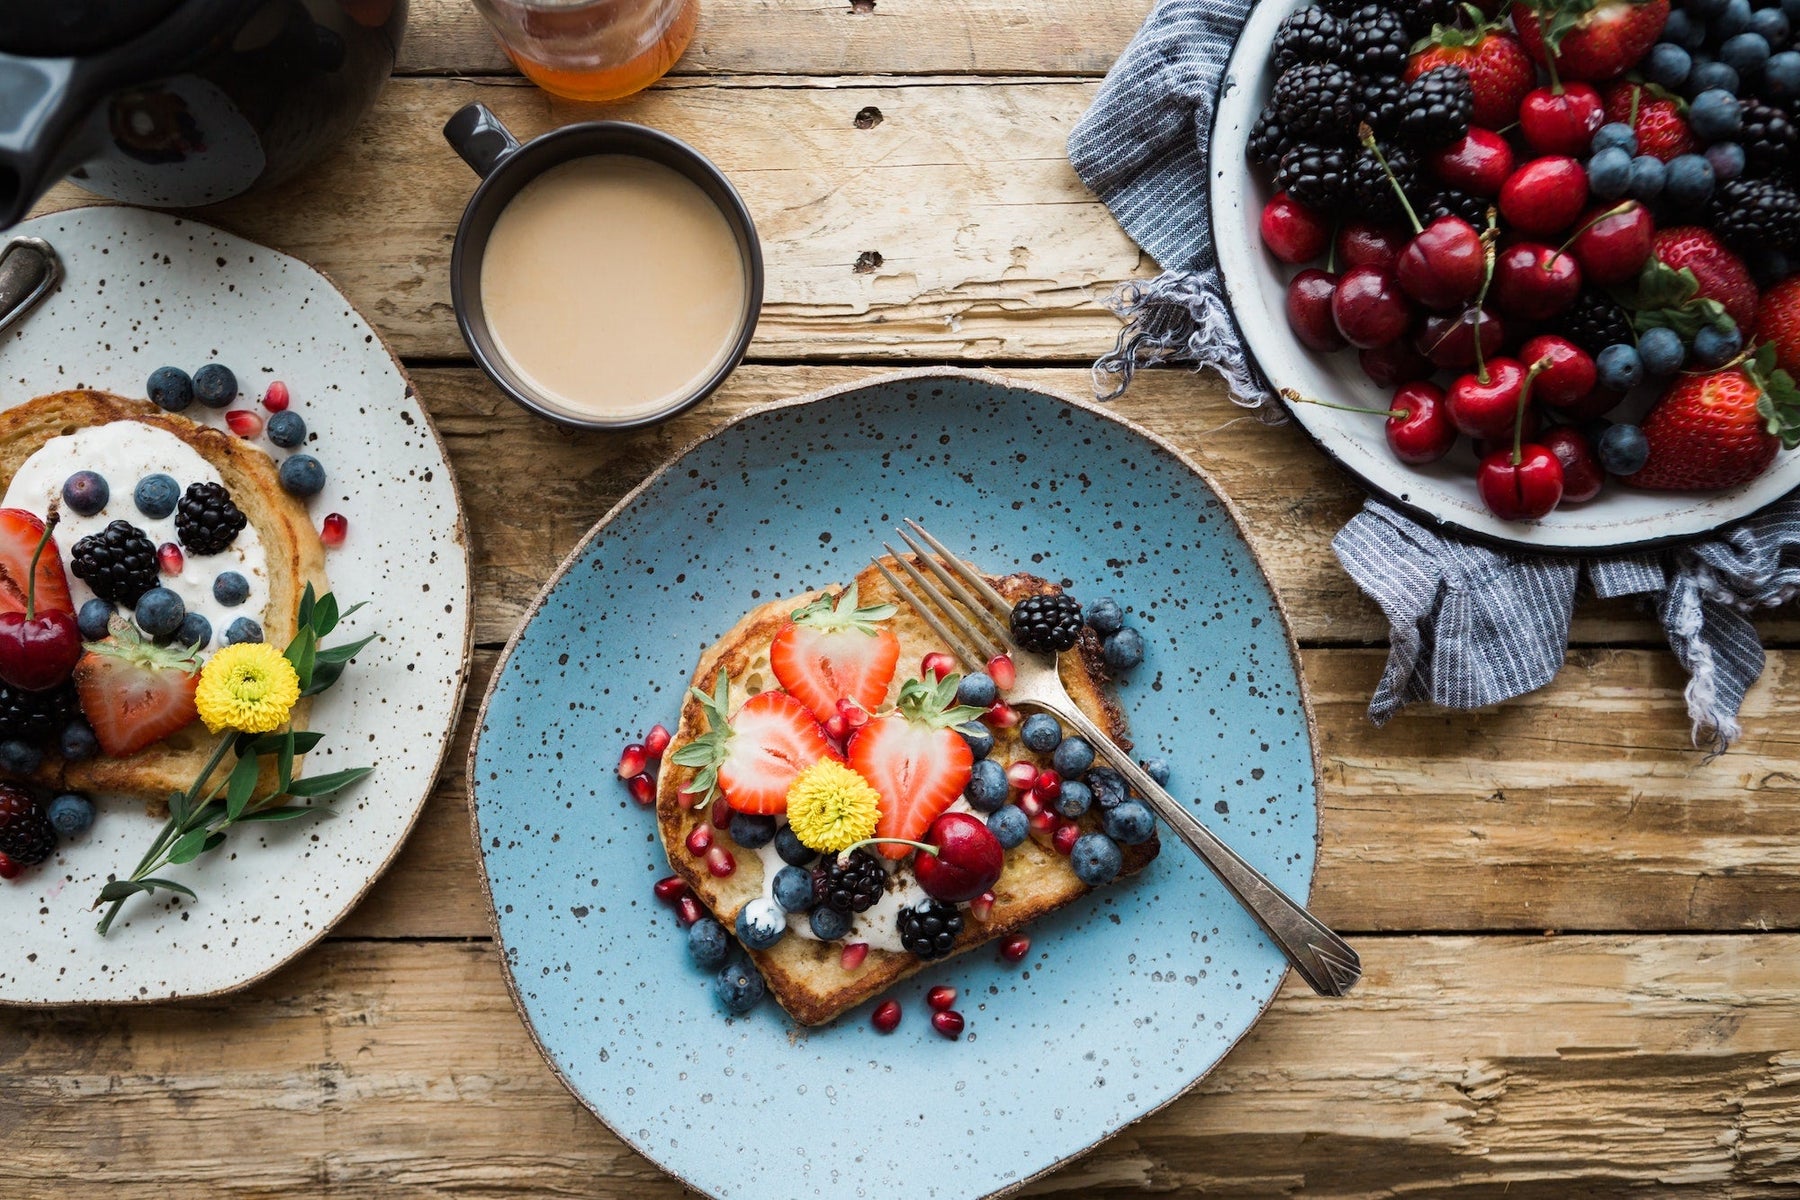 Stay Brunch Ready: 18 Ingredients To Always Have Handy - Antsy Labs